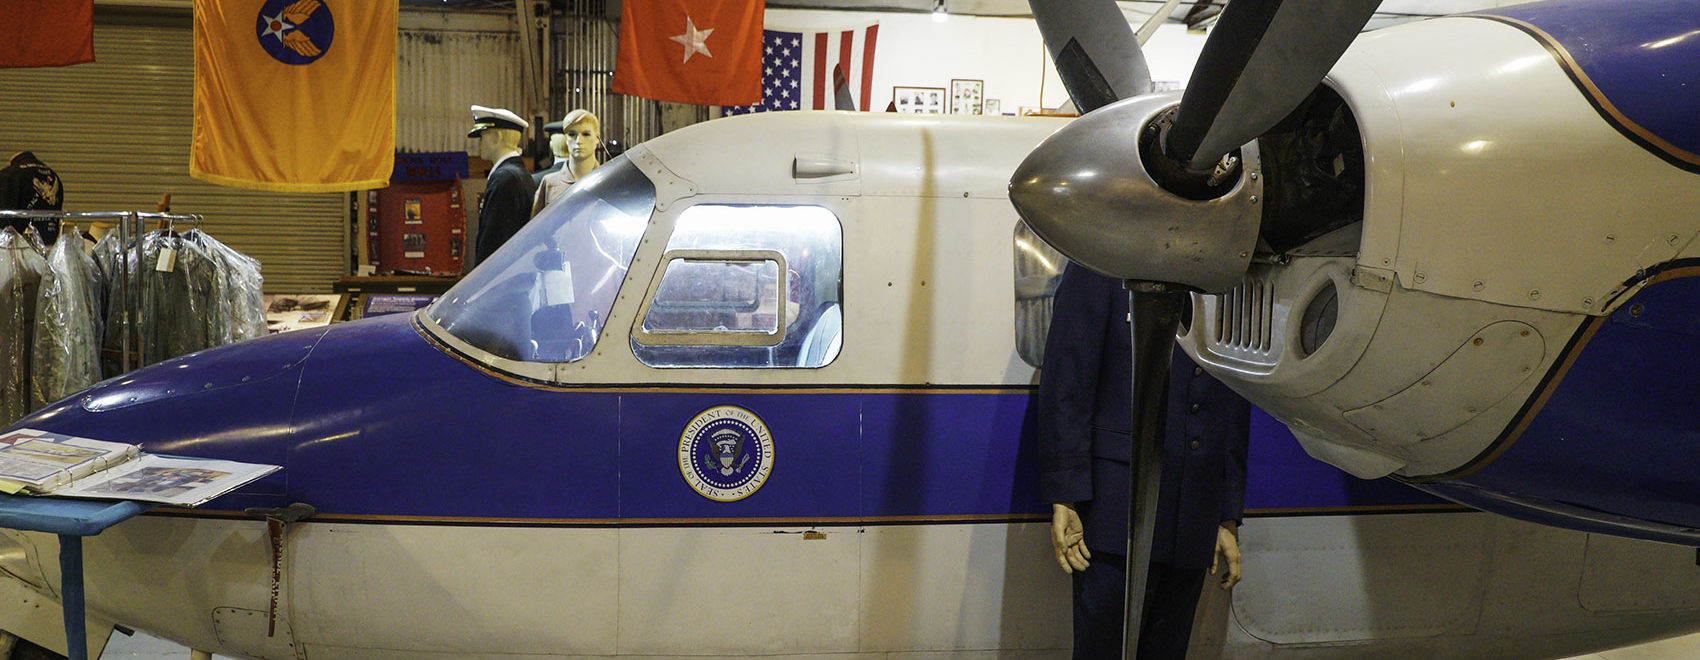 side view of propeller and cockpit of small Air Force One with presidential seal below window